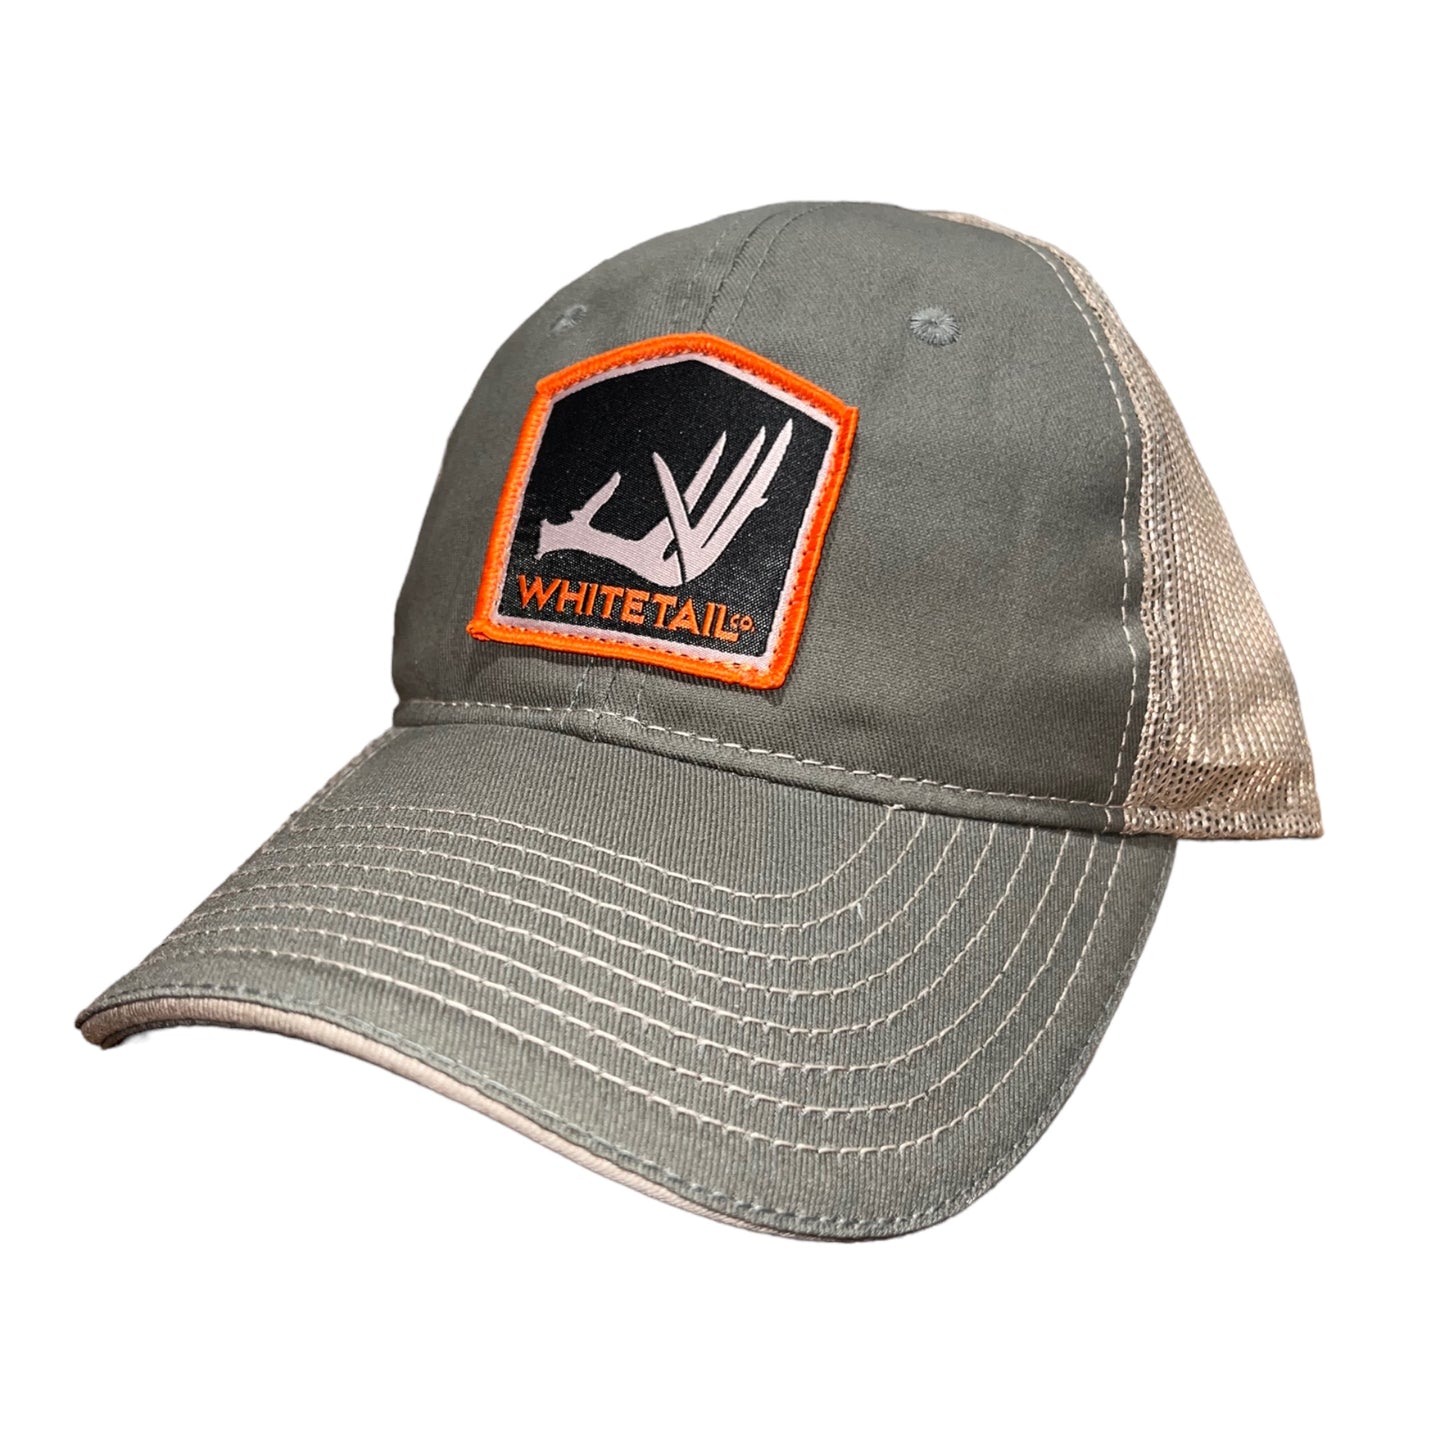 Whitetail Co. Unstructured Shed Hat Olive/Khaki